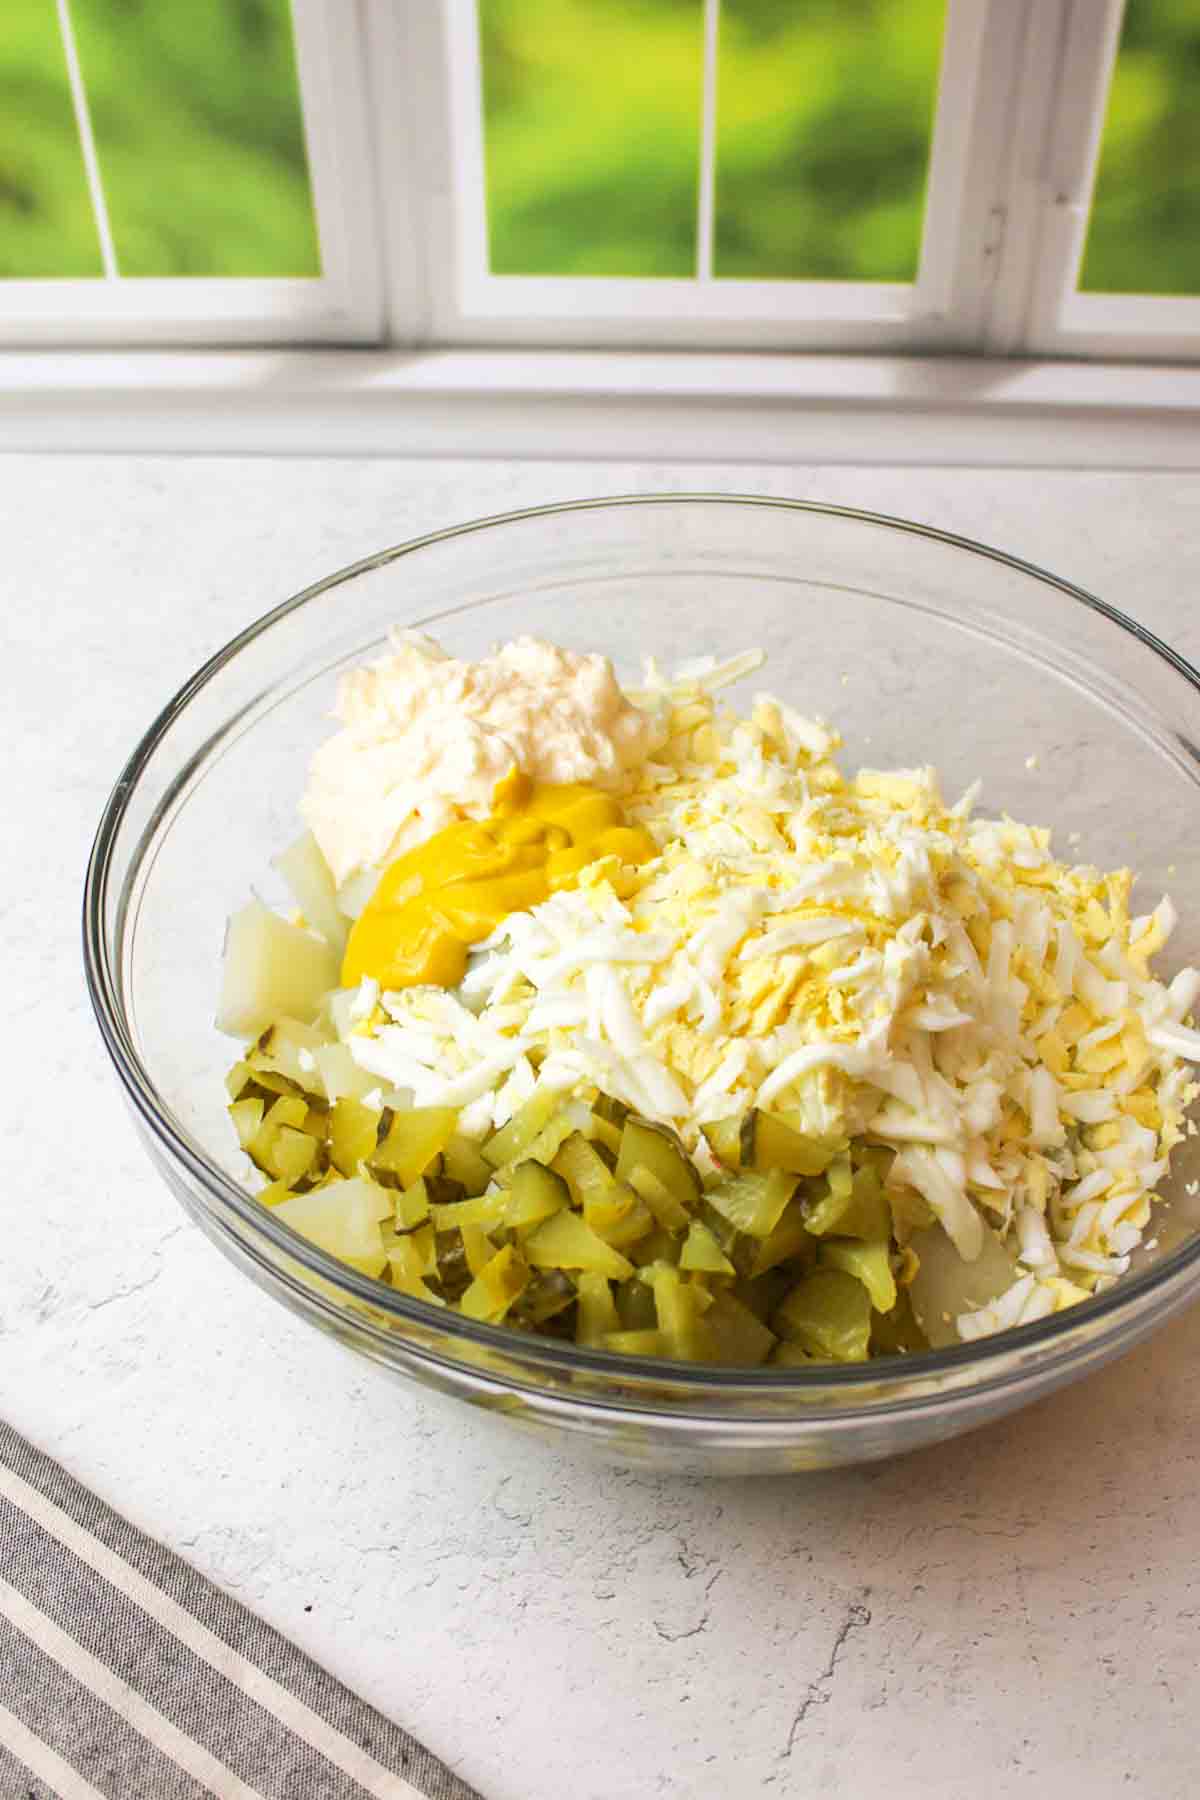 the ingredients needed to make dill pickle potato salad in a mixing bowl